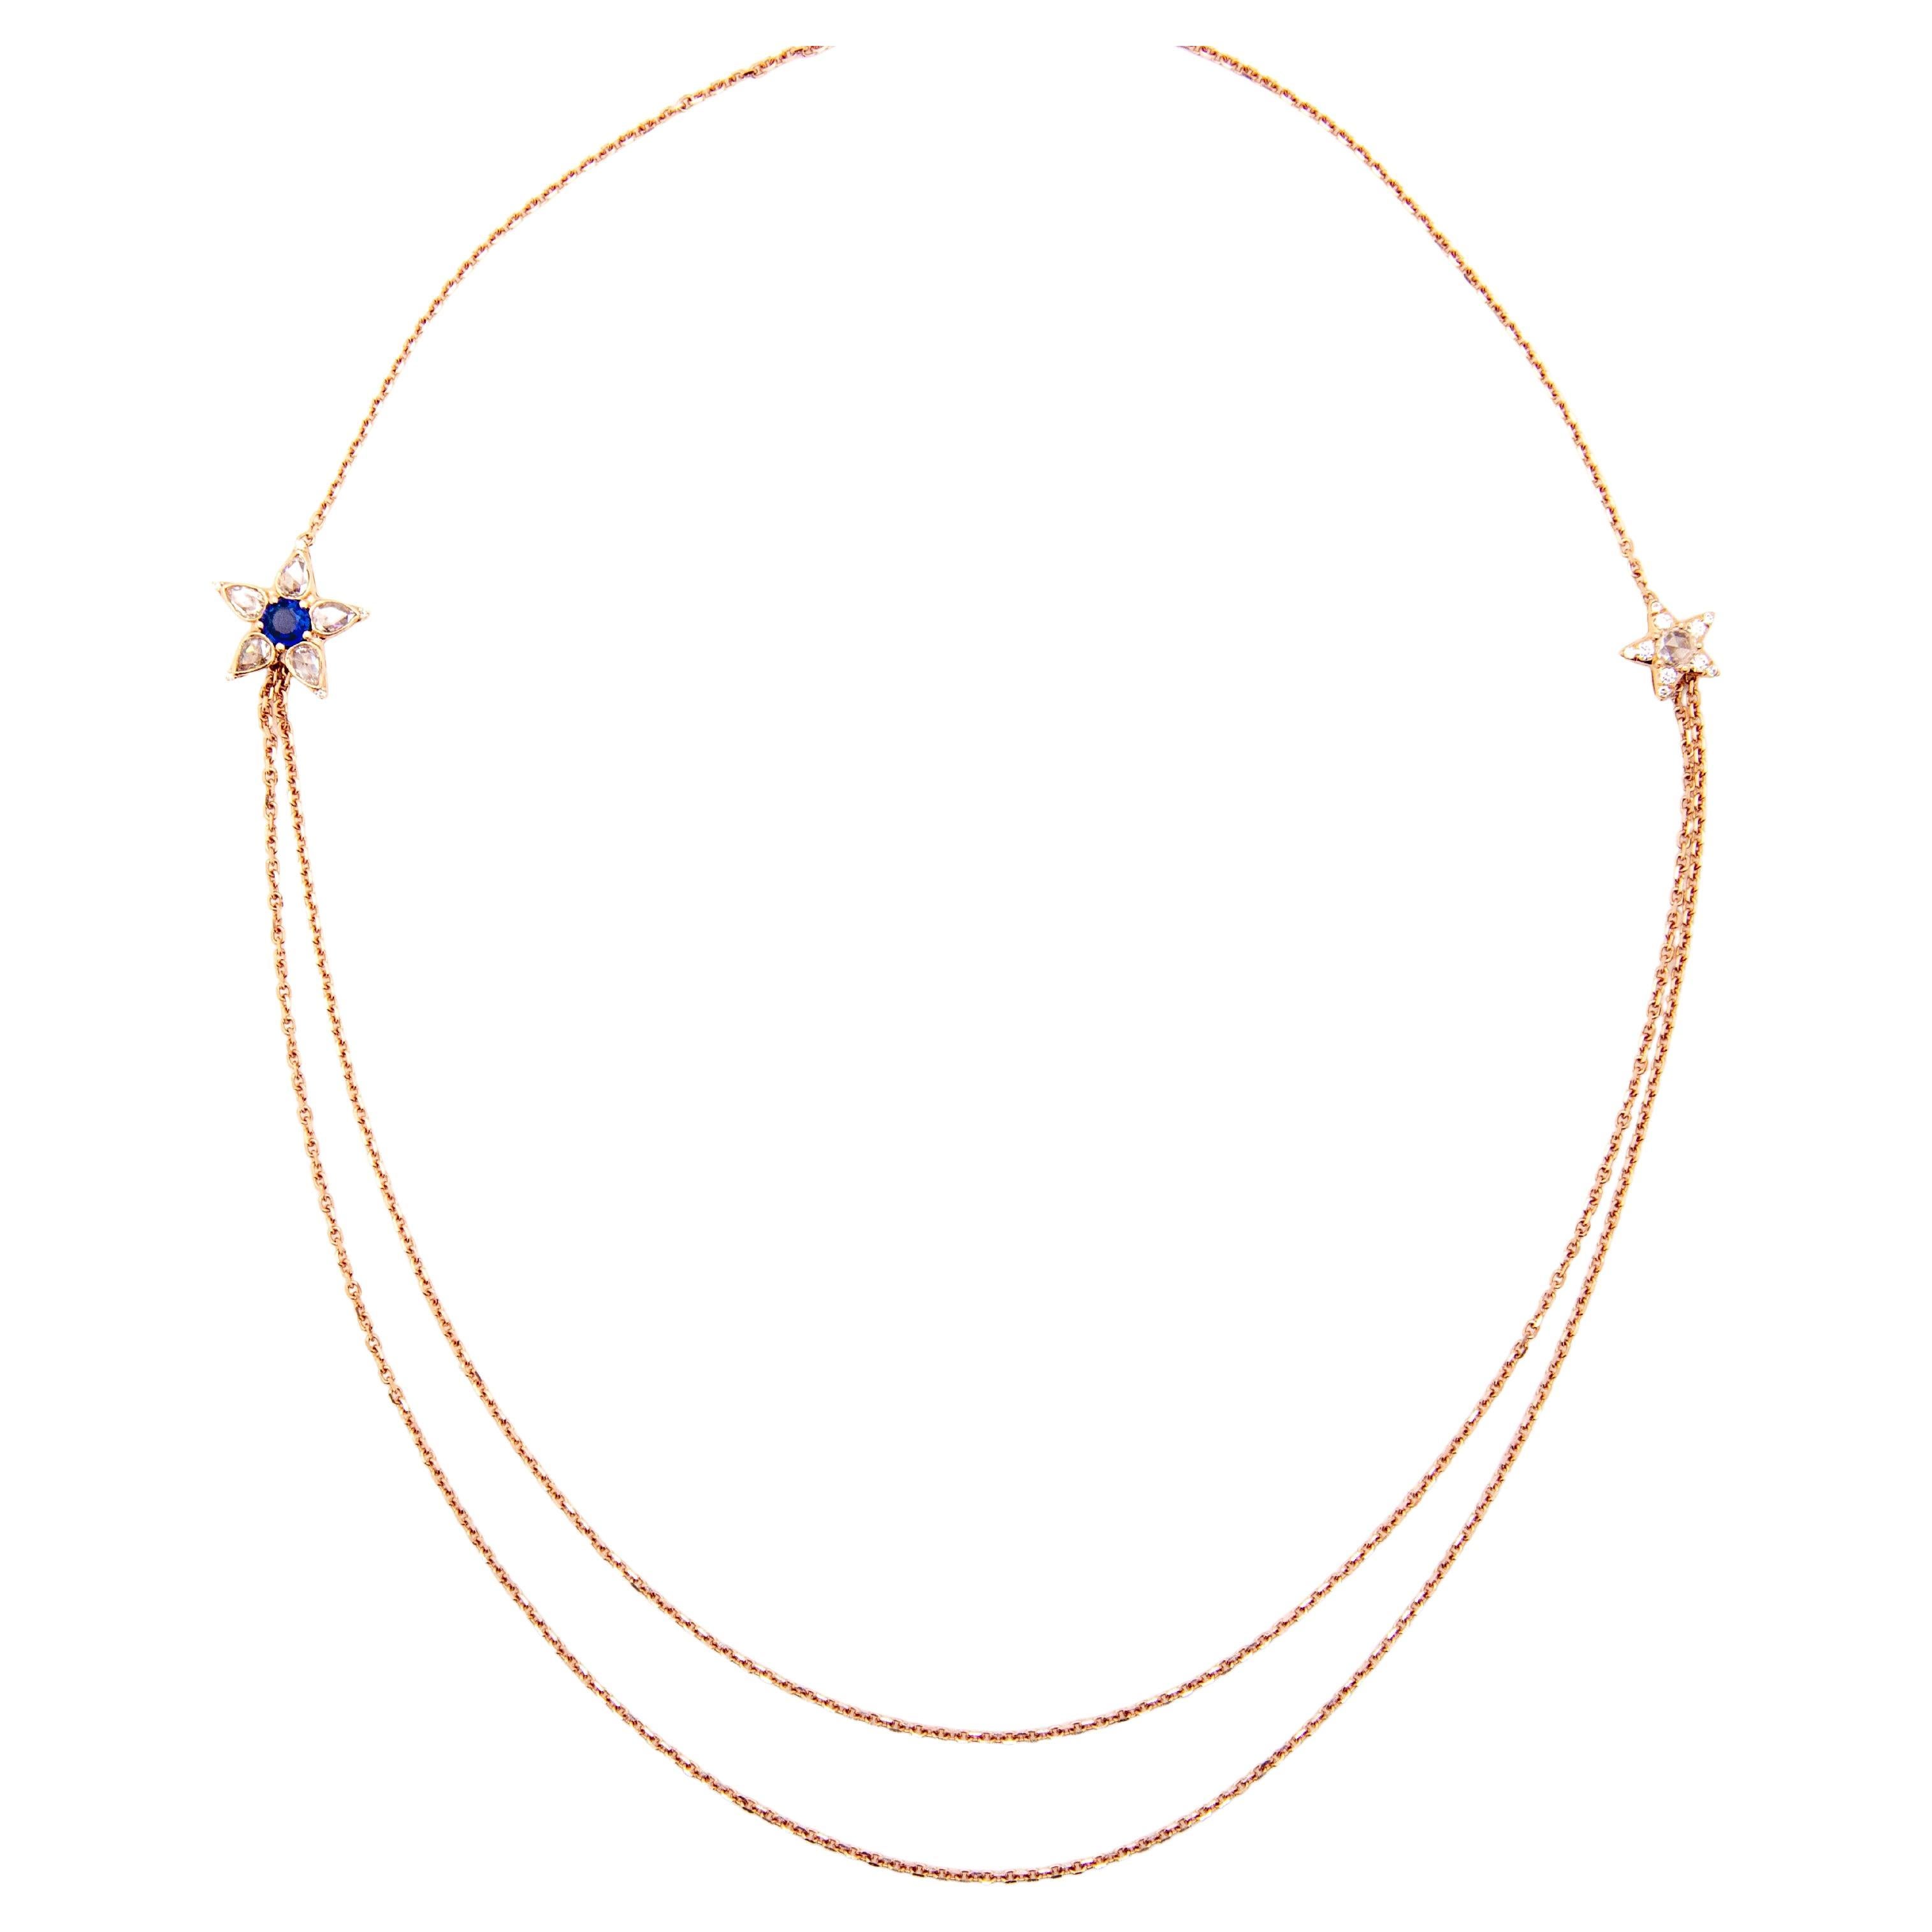 Diamond and Sapphire Necklace Rose Gold Chain 